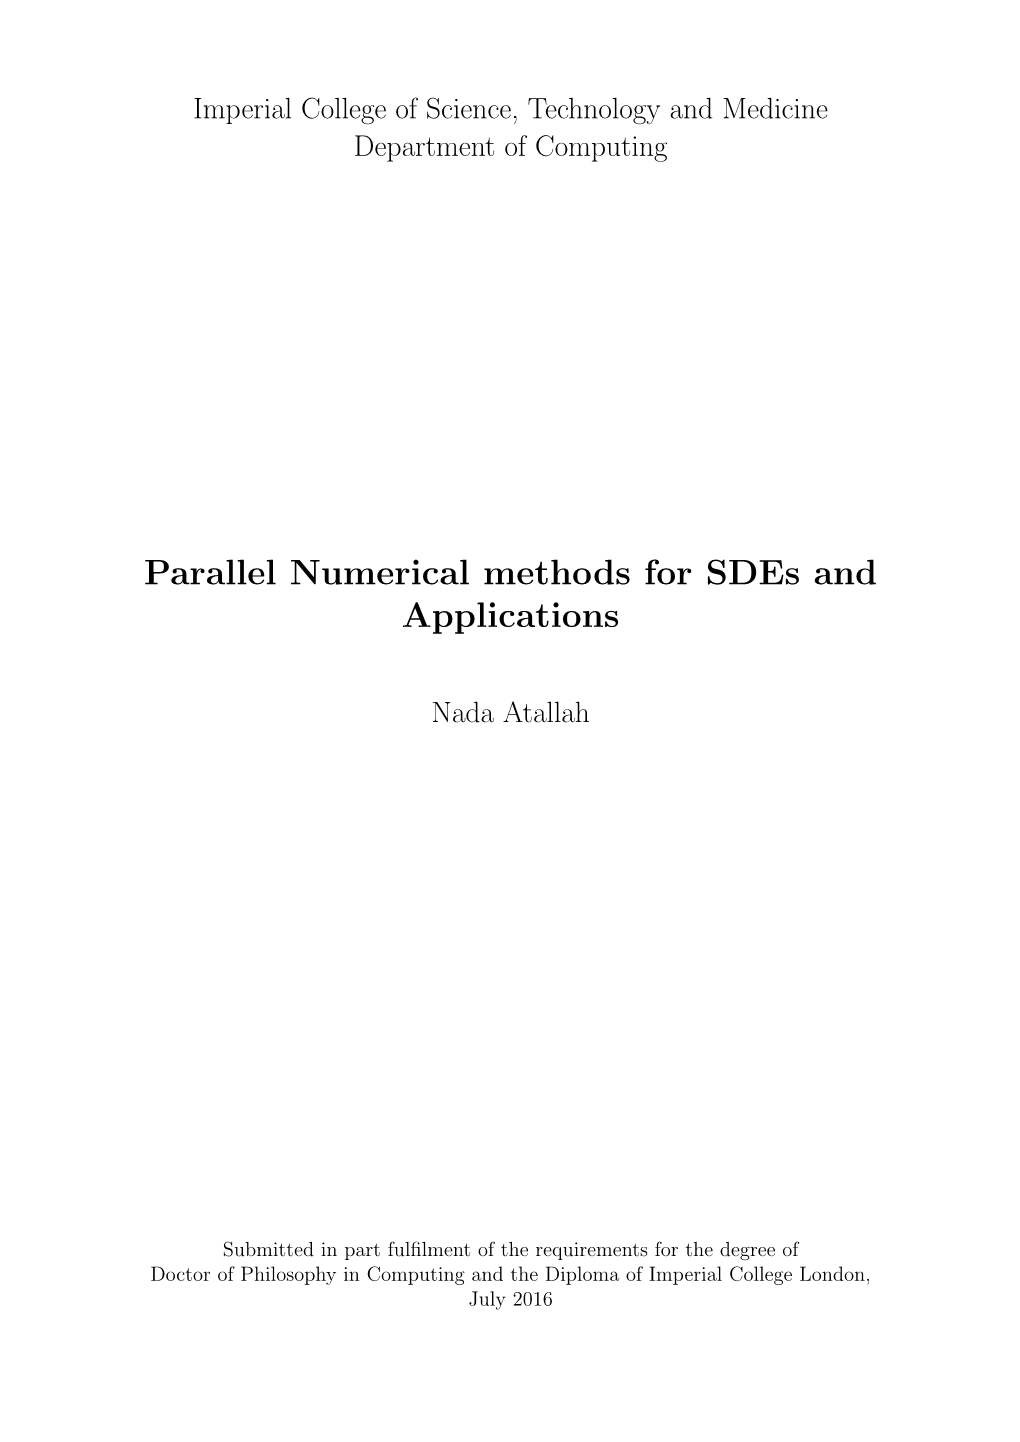 Parallel Numerical Methods for Sdes and Applications